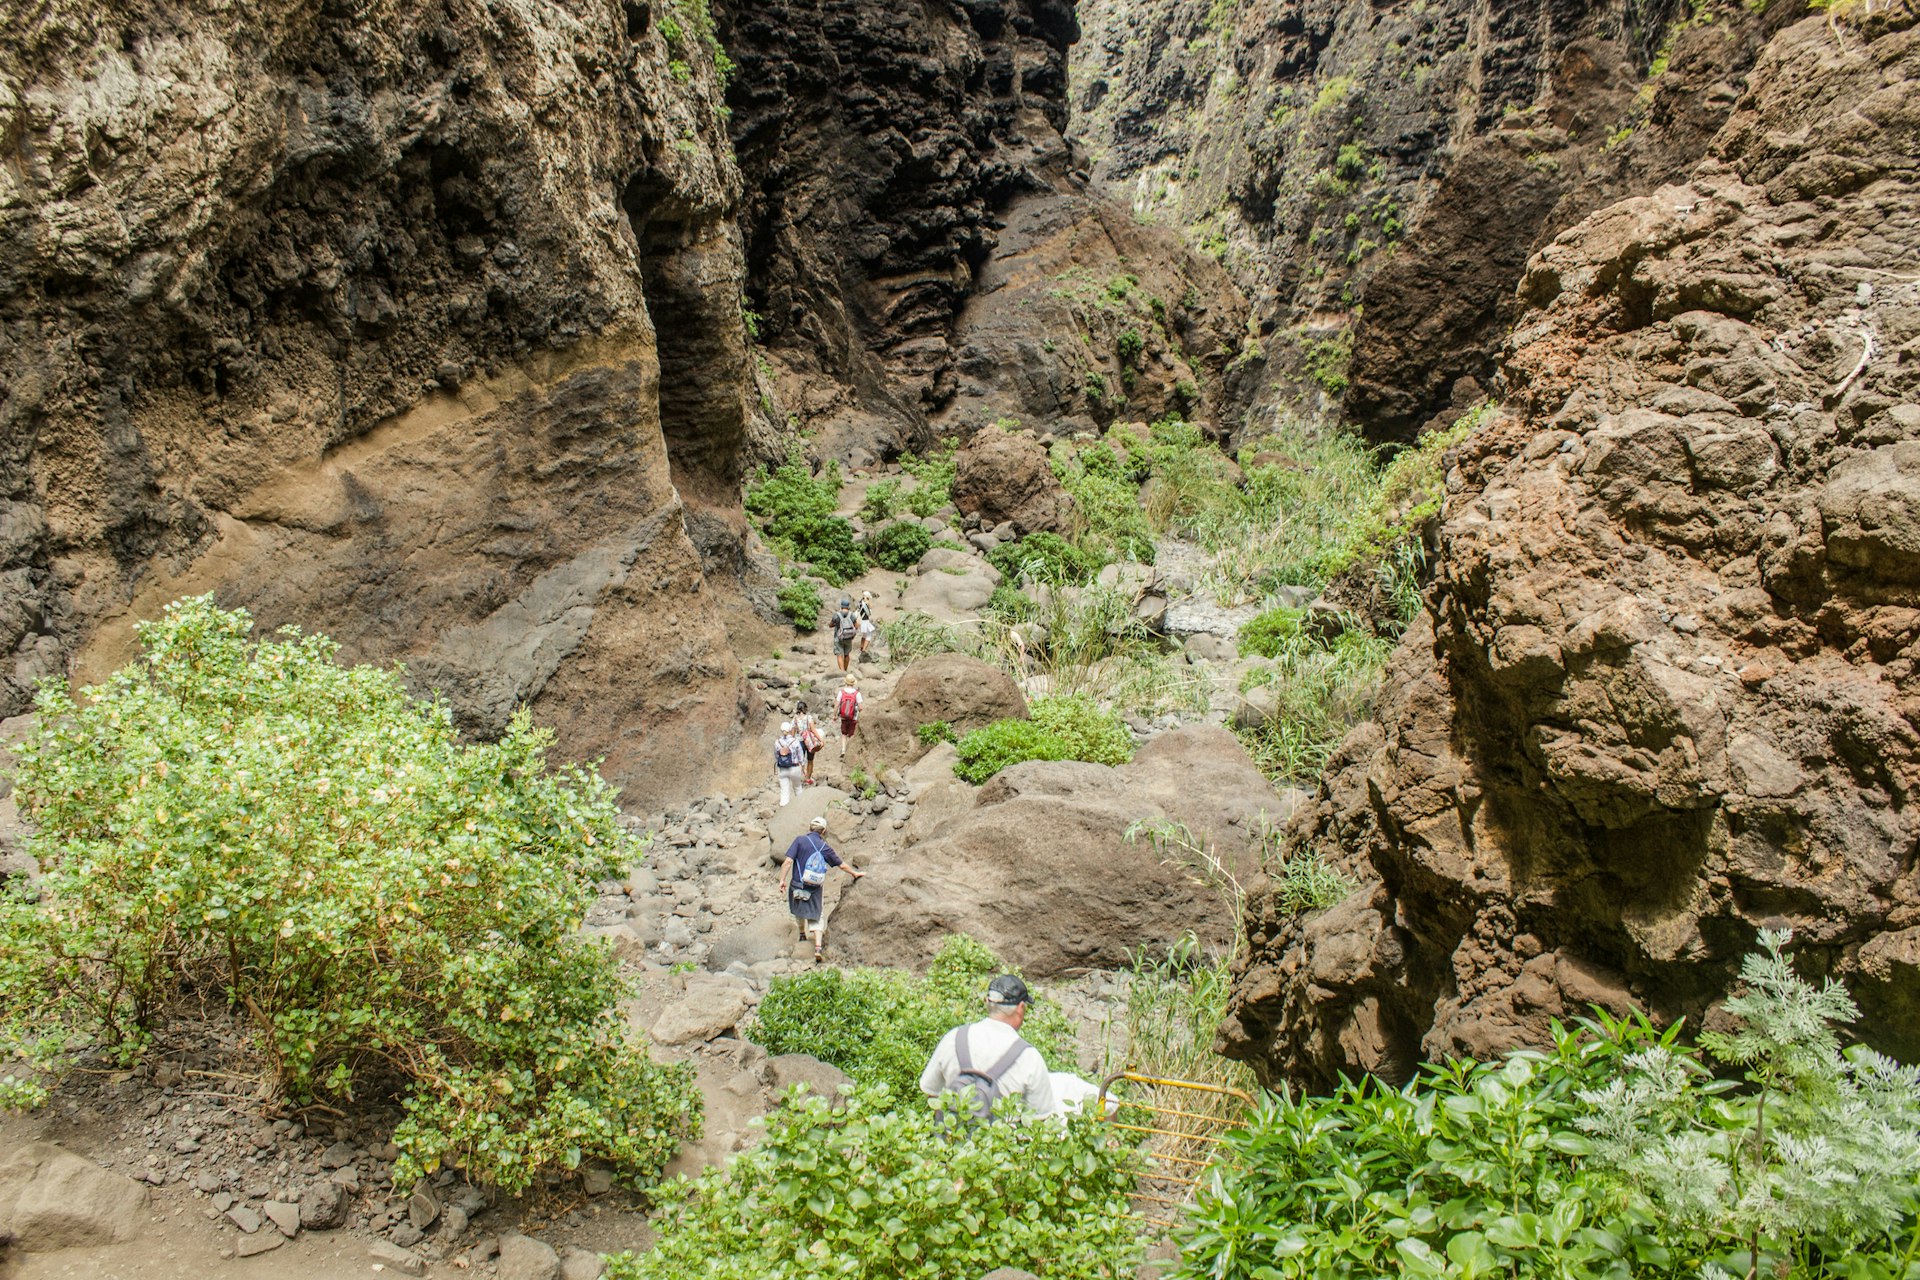 Hikers scramble down a steep path into a gorge with high rock walls